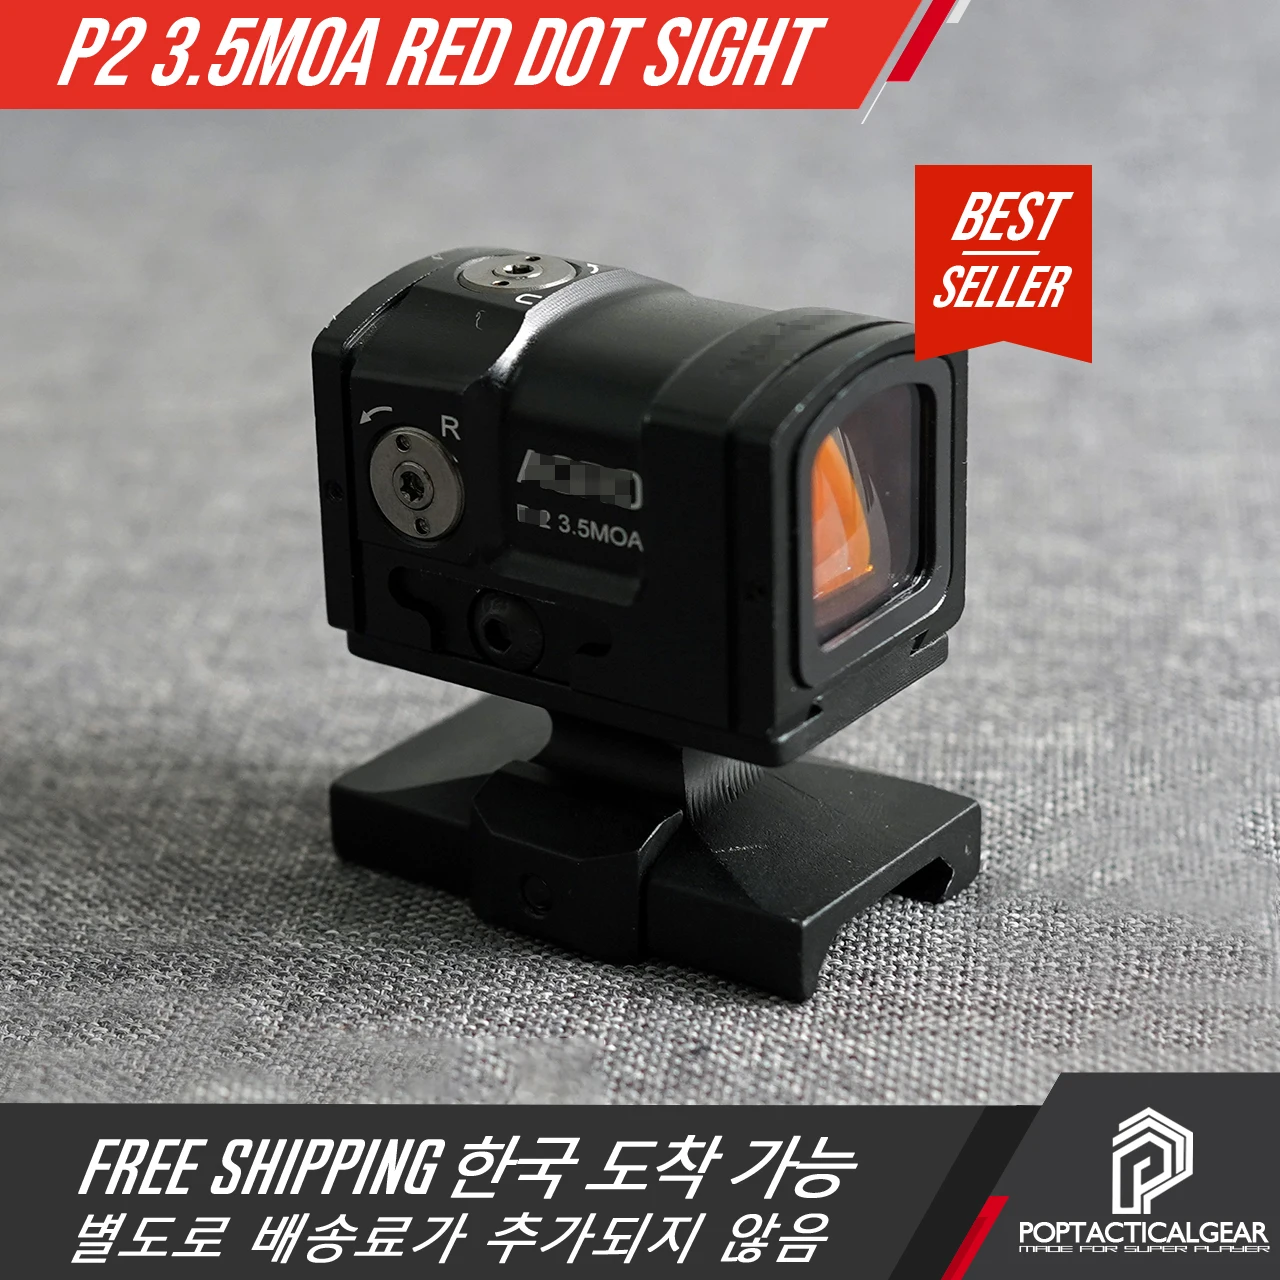 Airsoft P2 Red Dot Reflex Sight 3.5MOA With Lower 1/3 (39MM Height) 1.54 Inch And Glock Mounts With Original Logo Marking